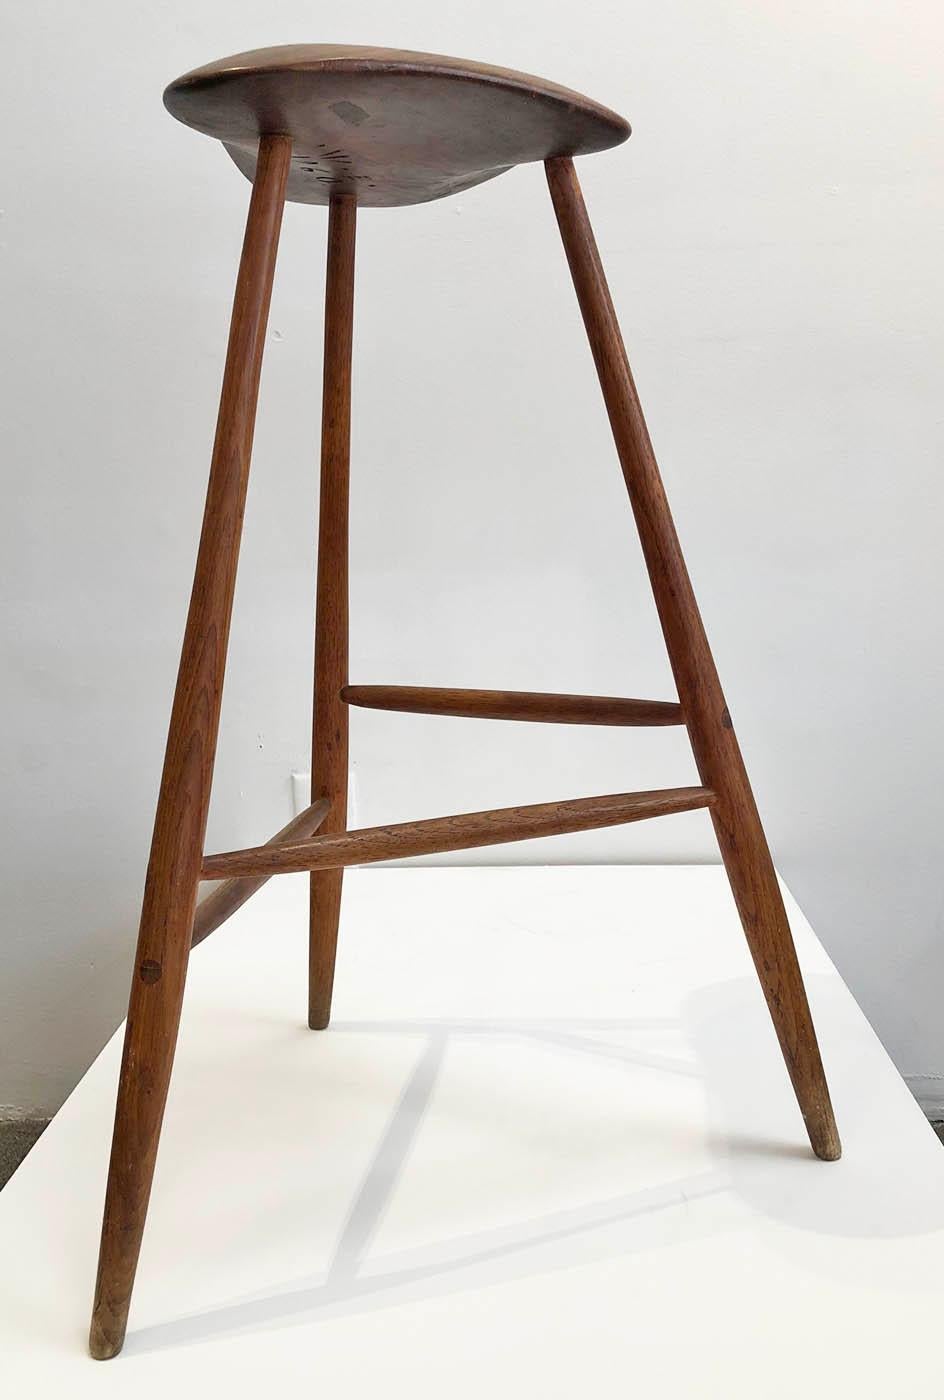 Hand crafted wooden stool by American artist and craftsman, Wharton Esherick. Signed and dated 1960. 
All original.